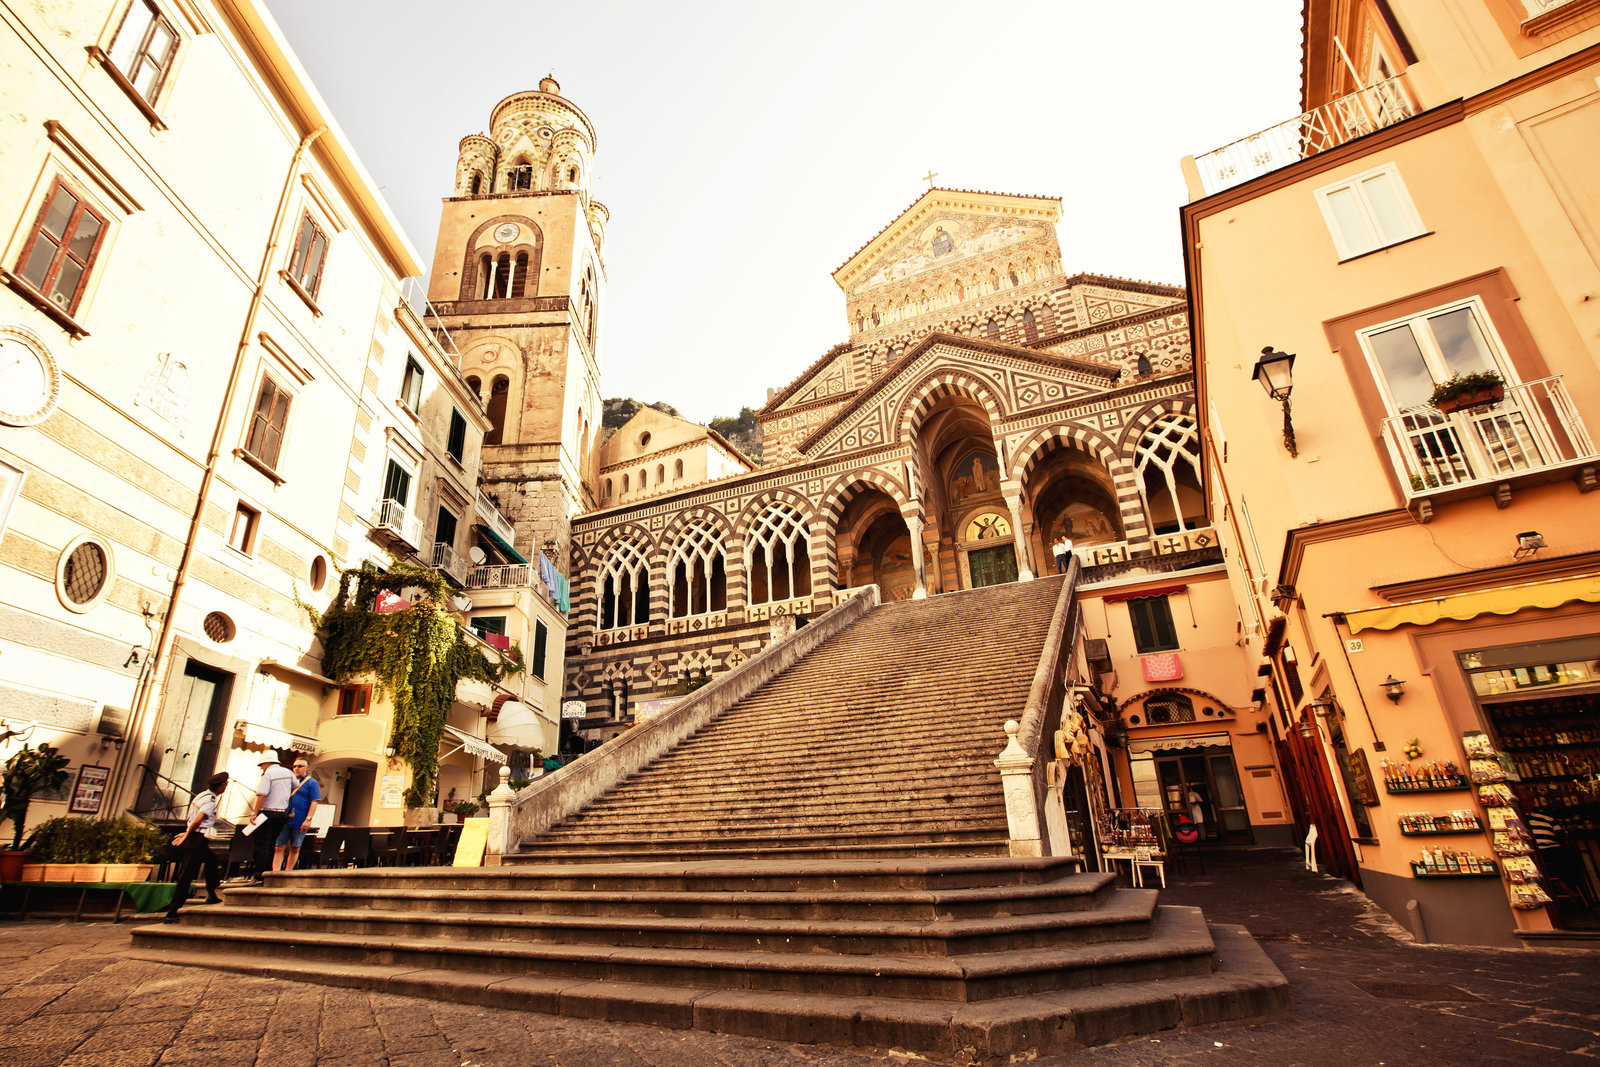 Square of the Cathedral of St Andrea in Amalfi